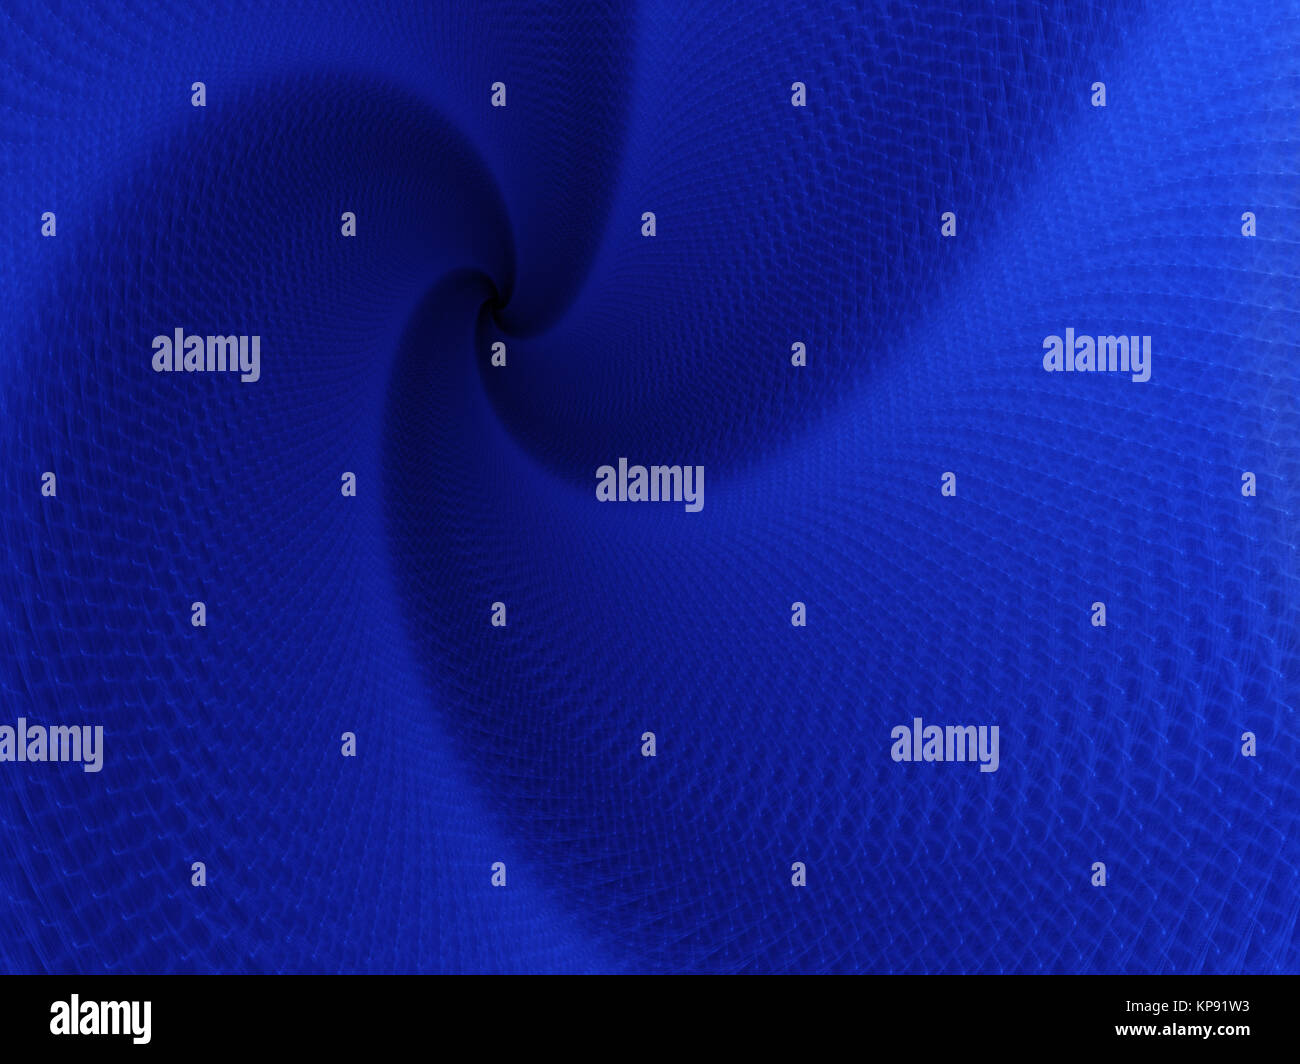 Abstract digitally generated dark blue background Stock Photo